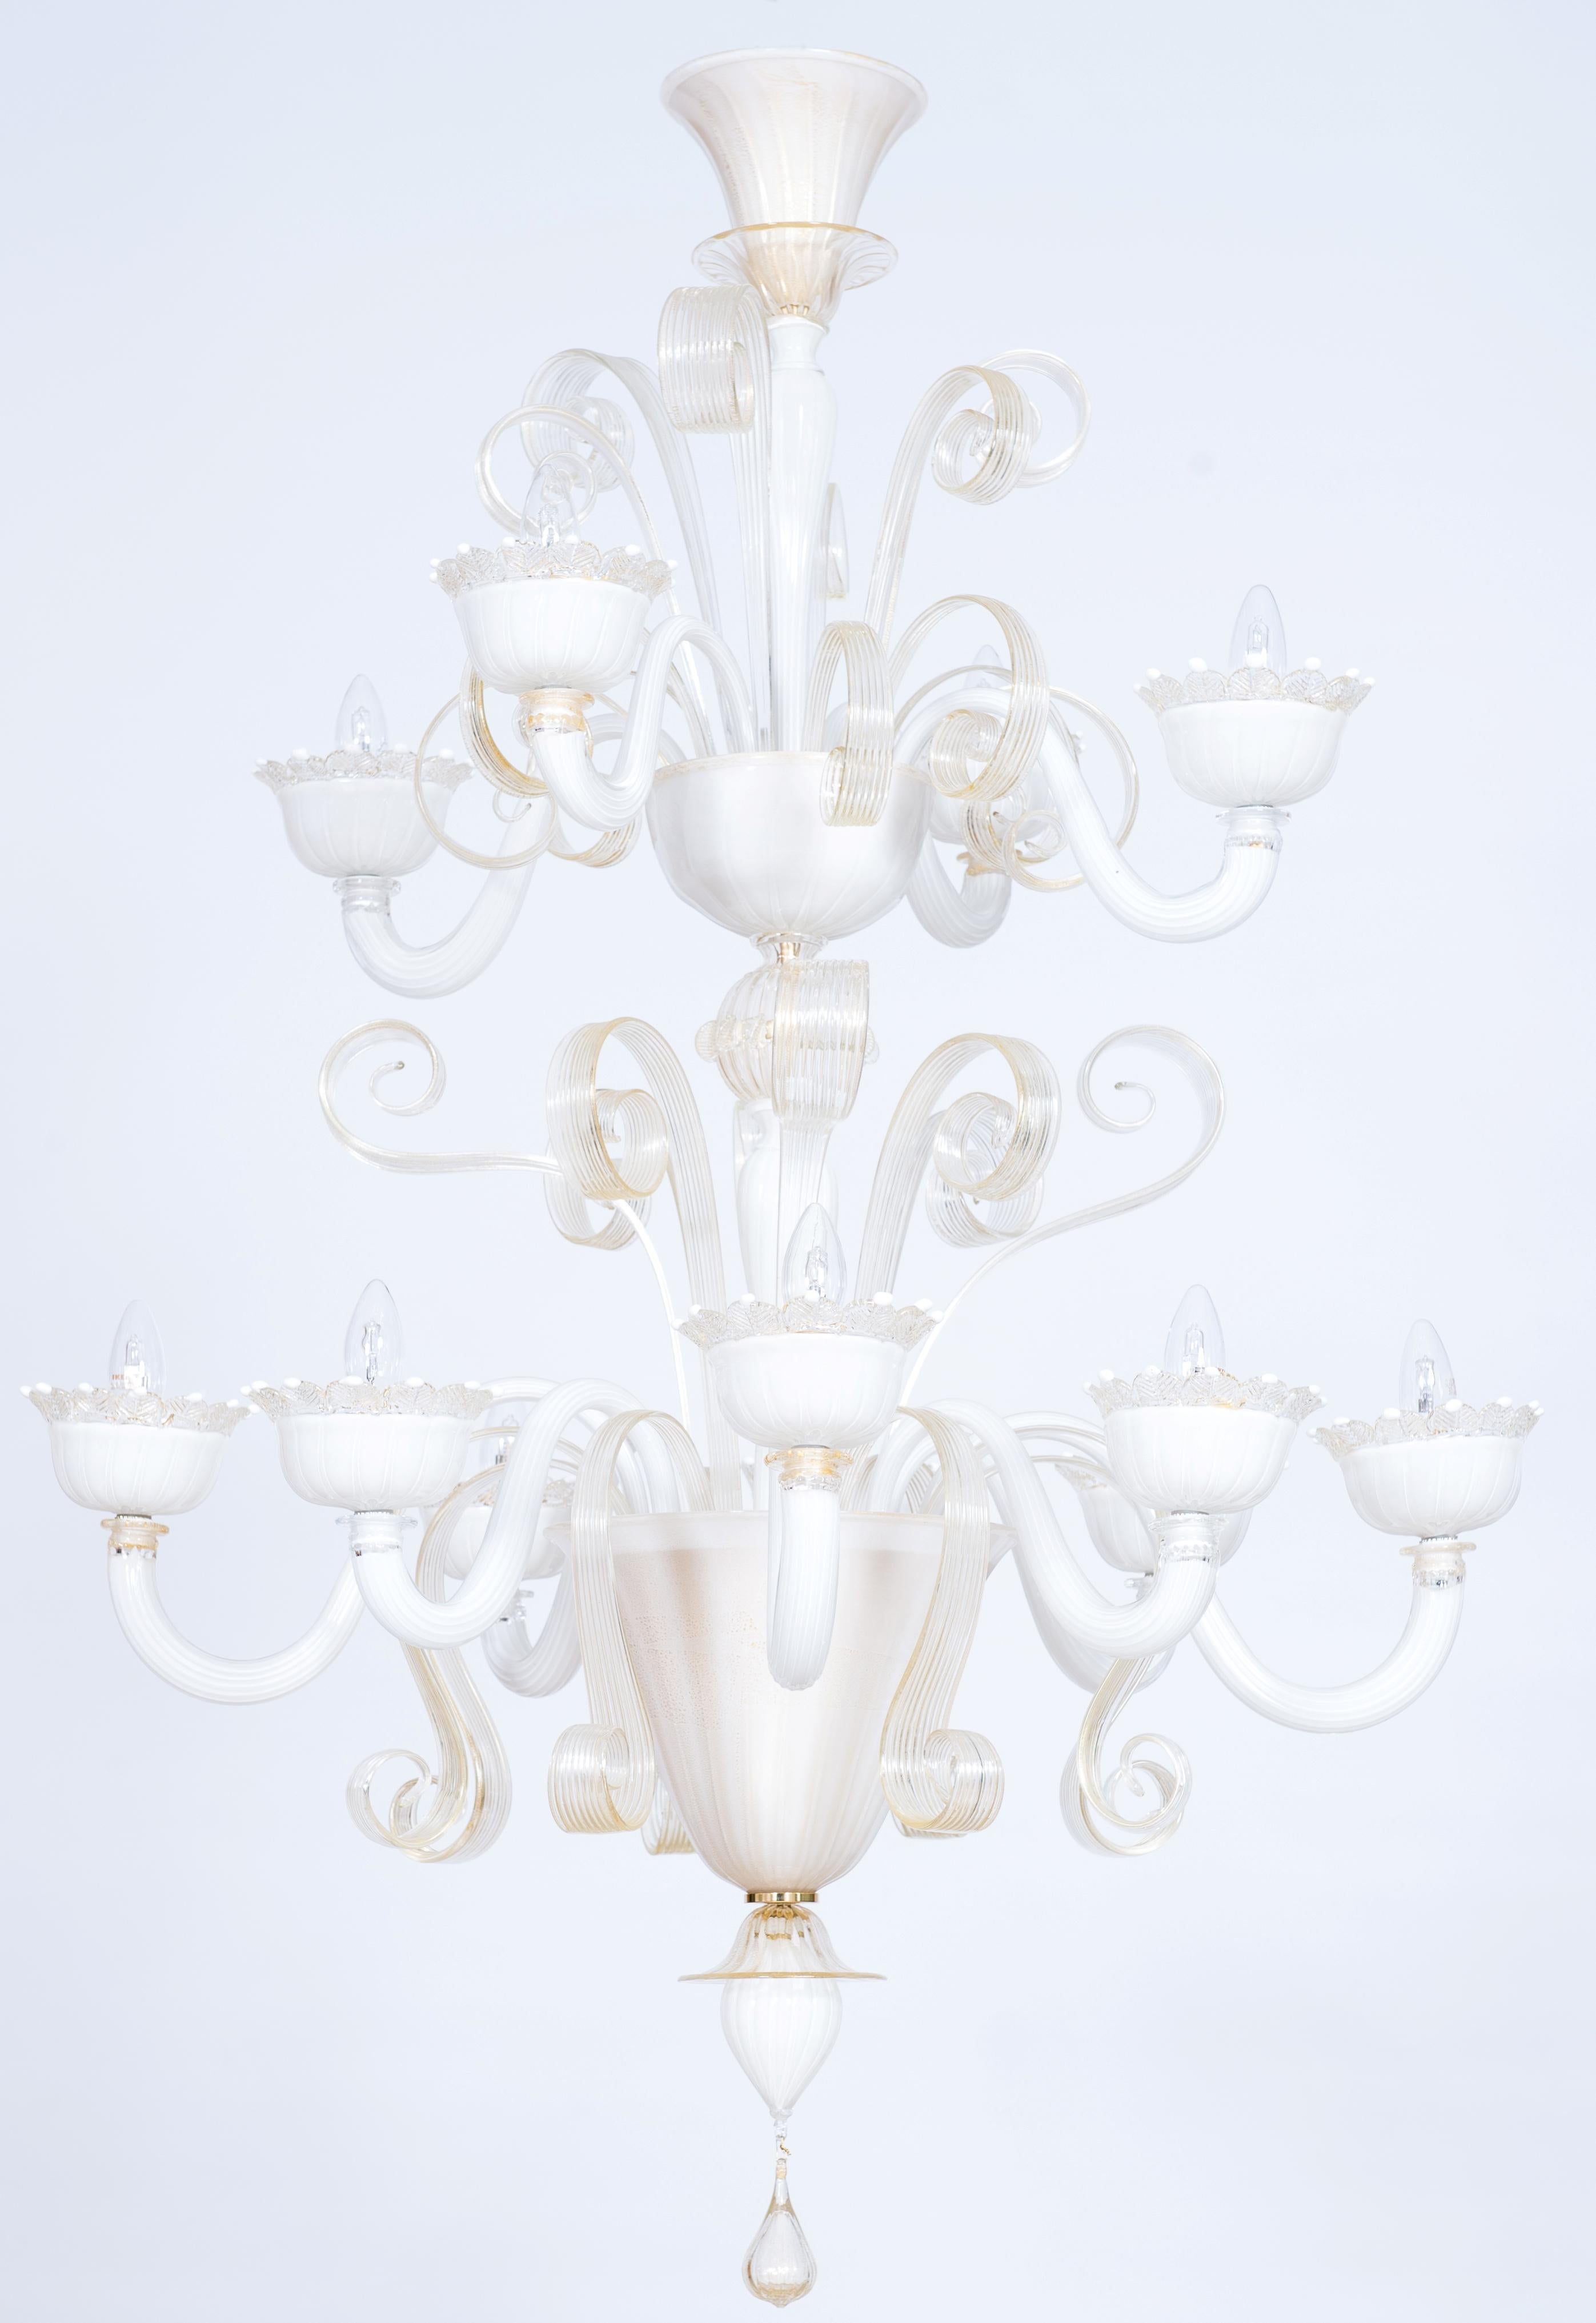 A Majestic White-Milk Murano Glass Chandelier with Gold Accents, Designed by Giovanni Dalla Fina, 21st Century Italy.
This breathtaking chandelier, entirely handcrafted from blown Murano glass, embodies the artistry and elegance of contemporary